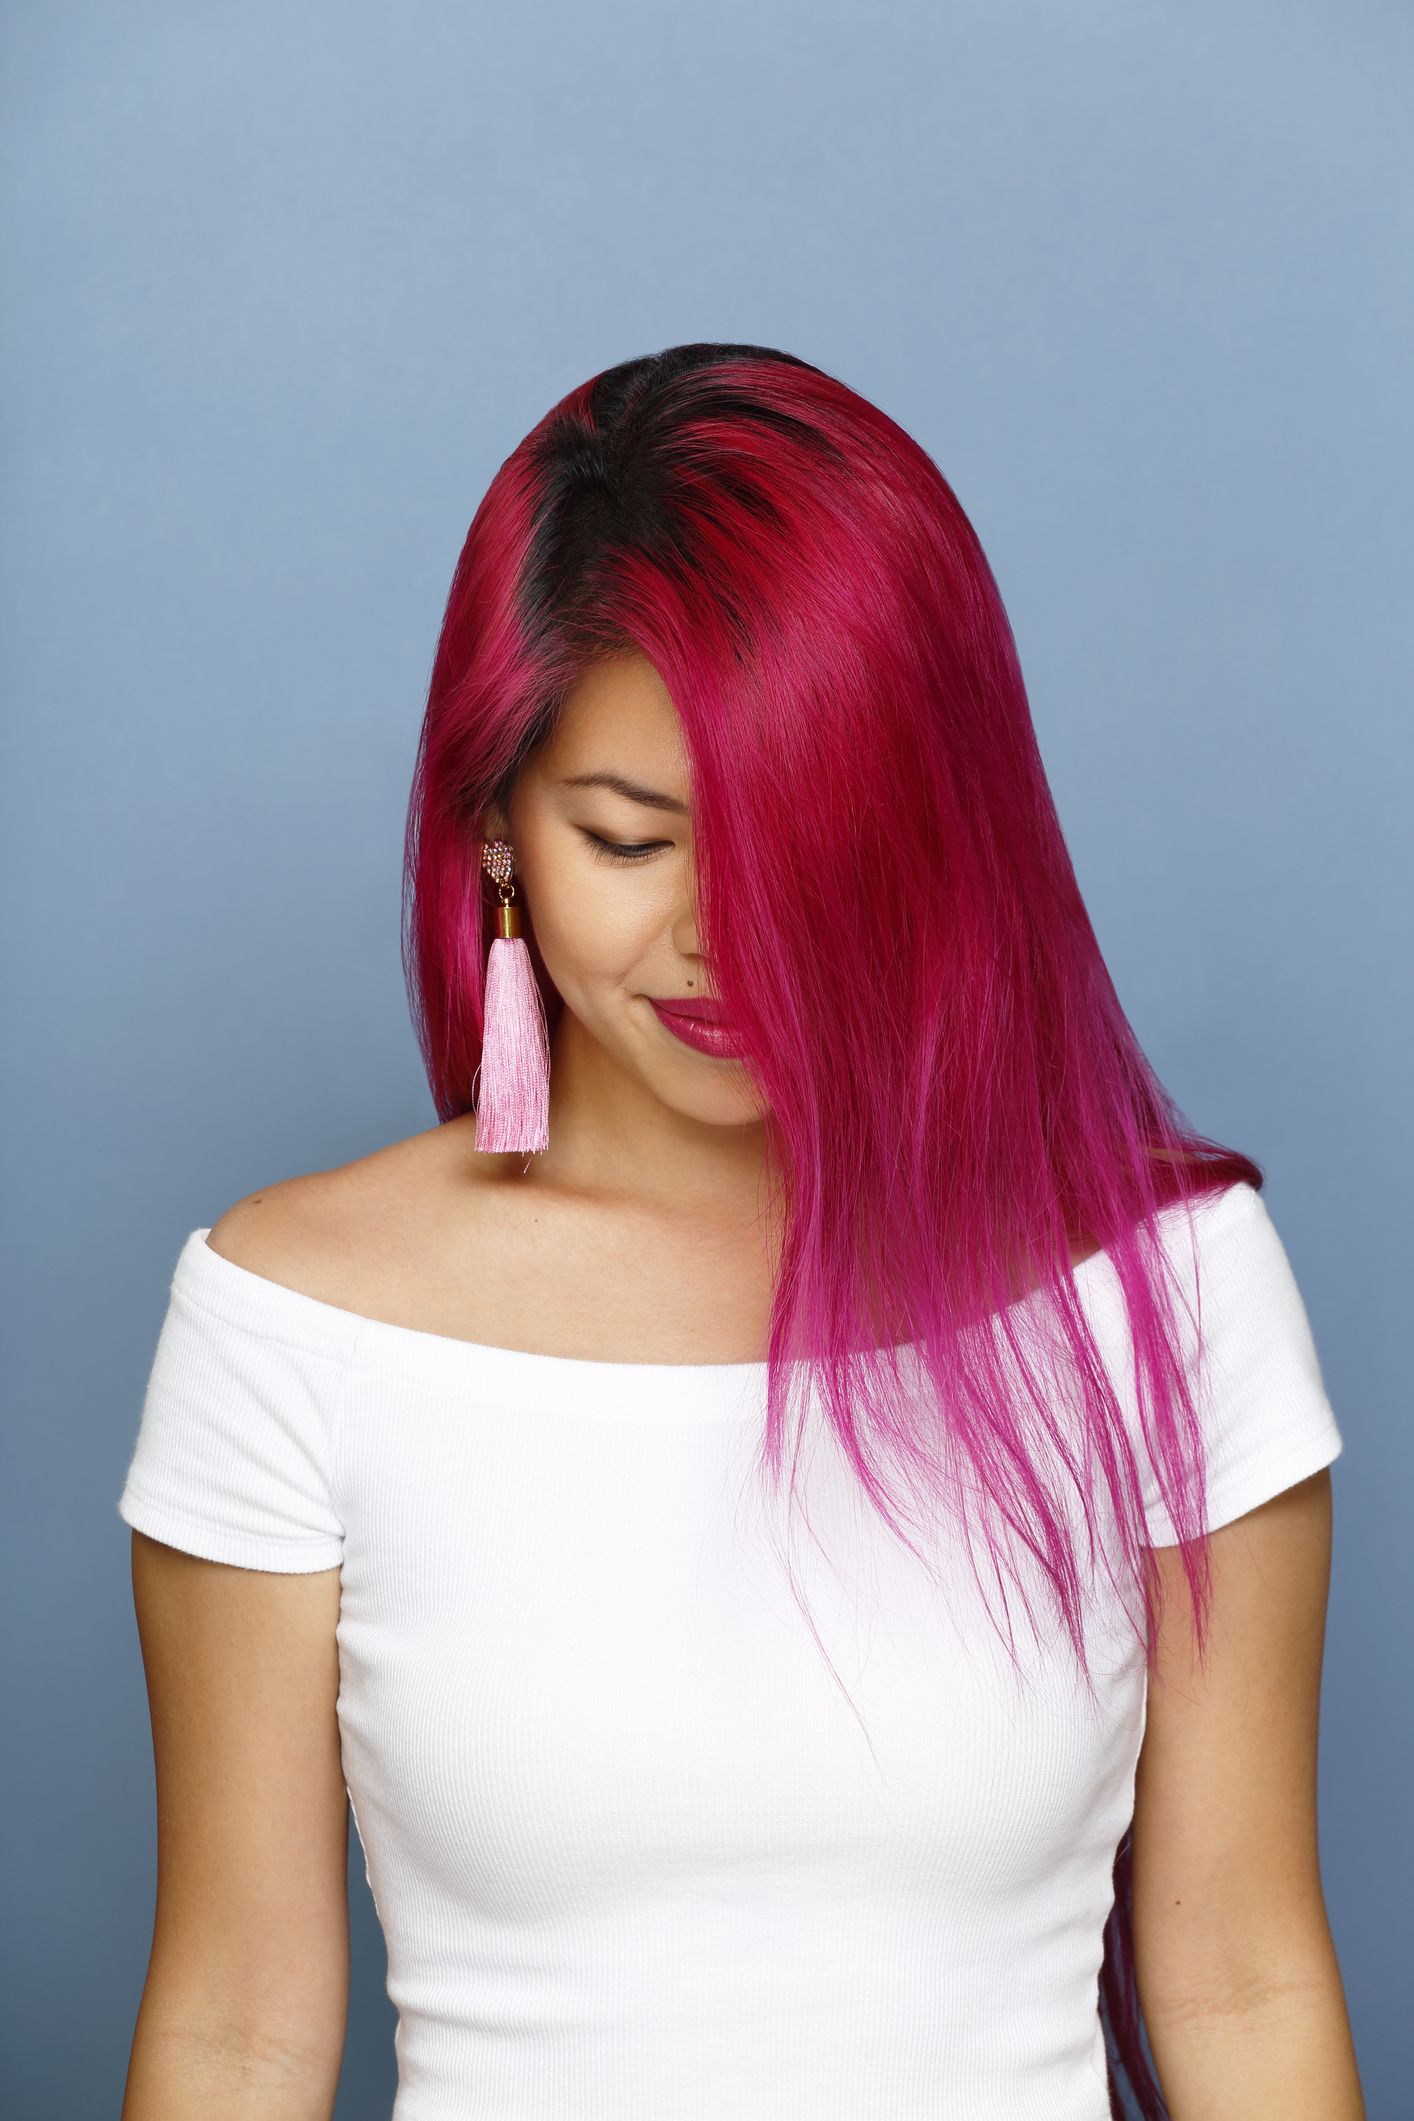 Best Hair Dye 2020 - Wash-In Colours to At-Home Box Dye Reviews